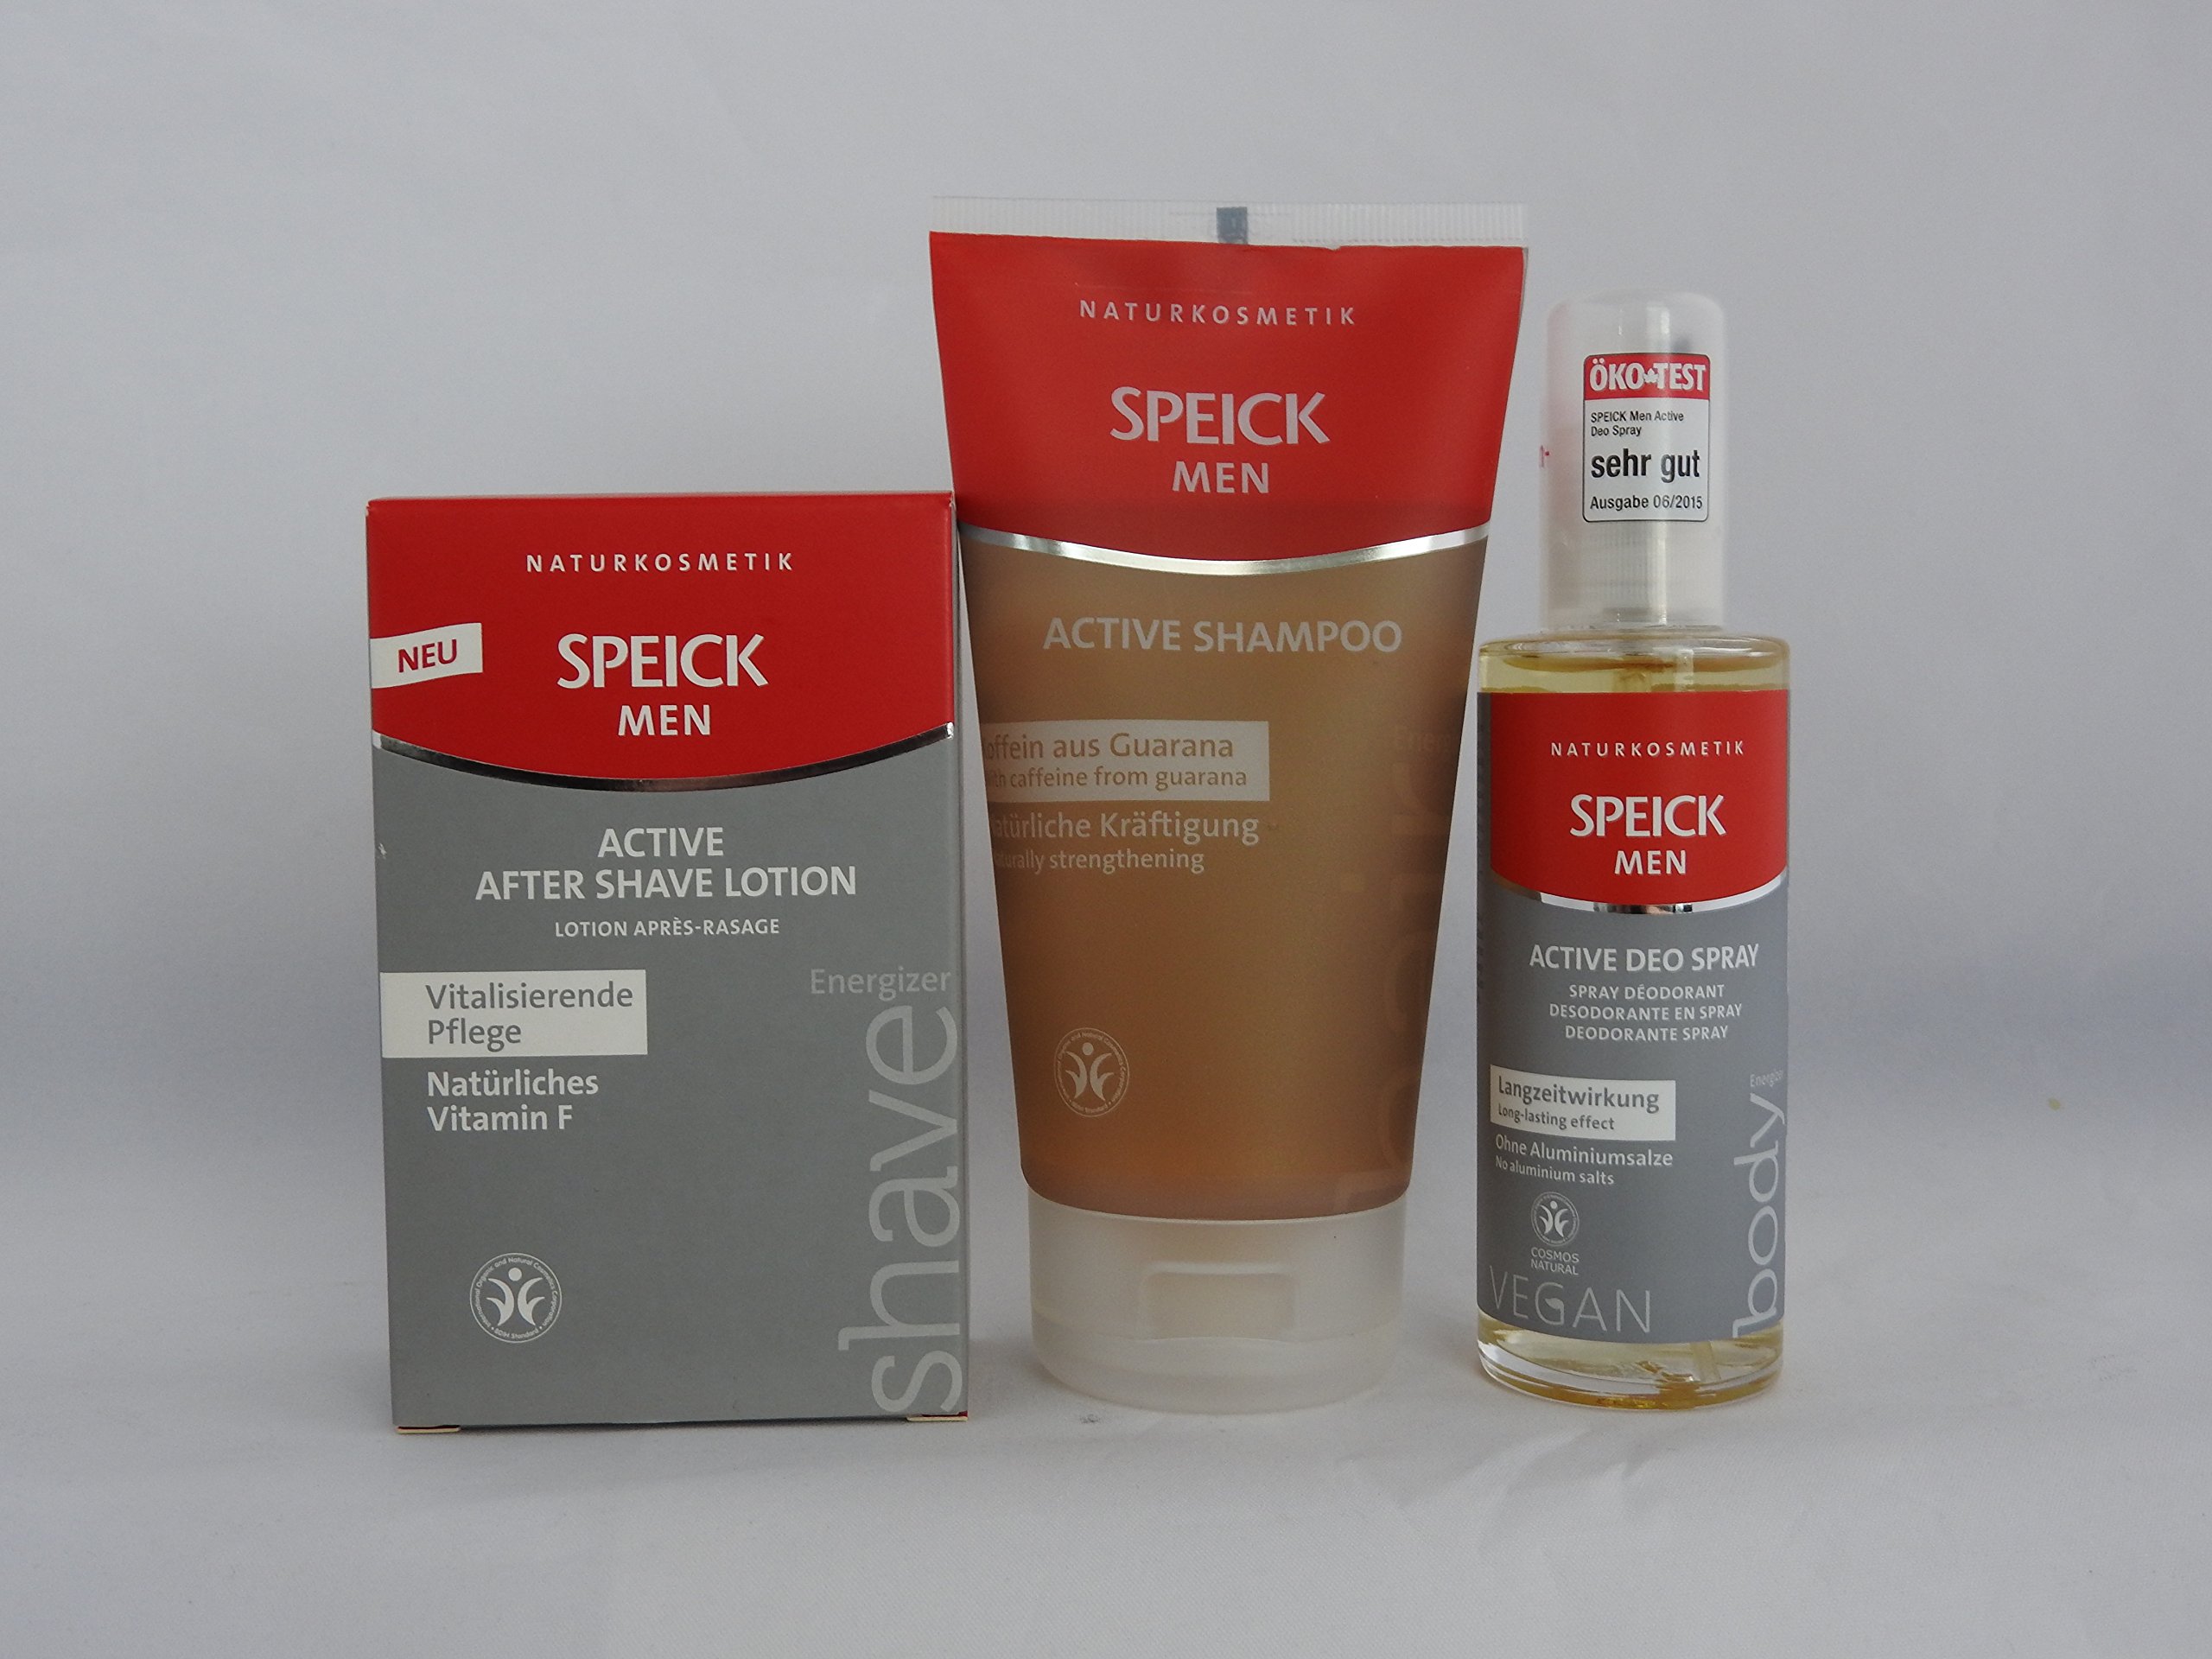 Speick Compact Travel Set for Men